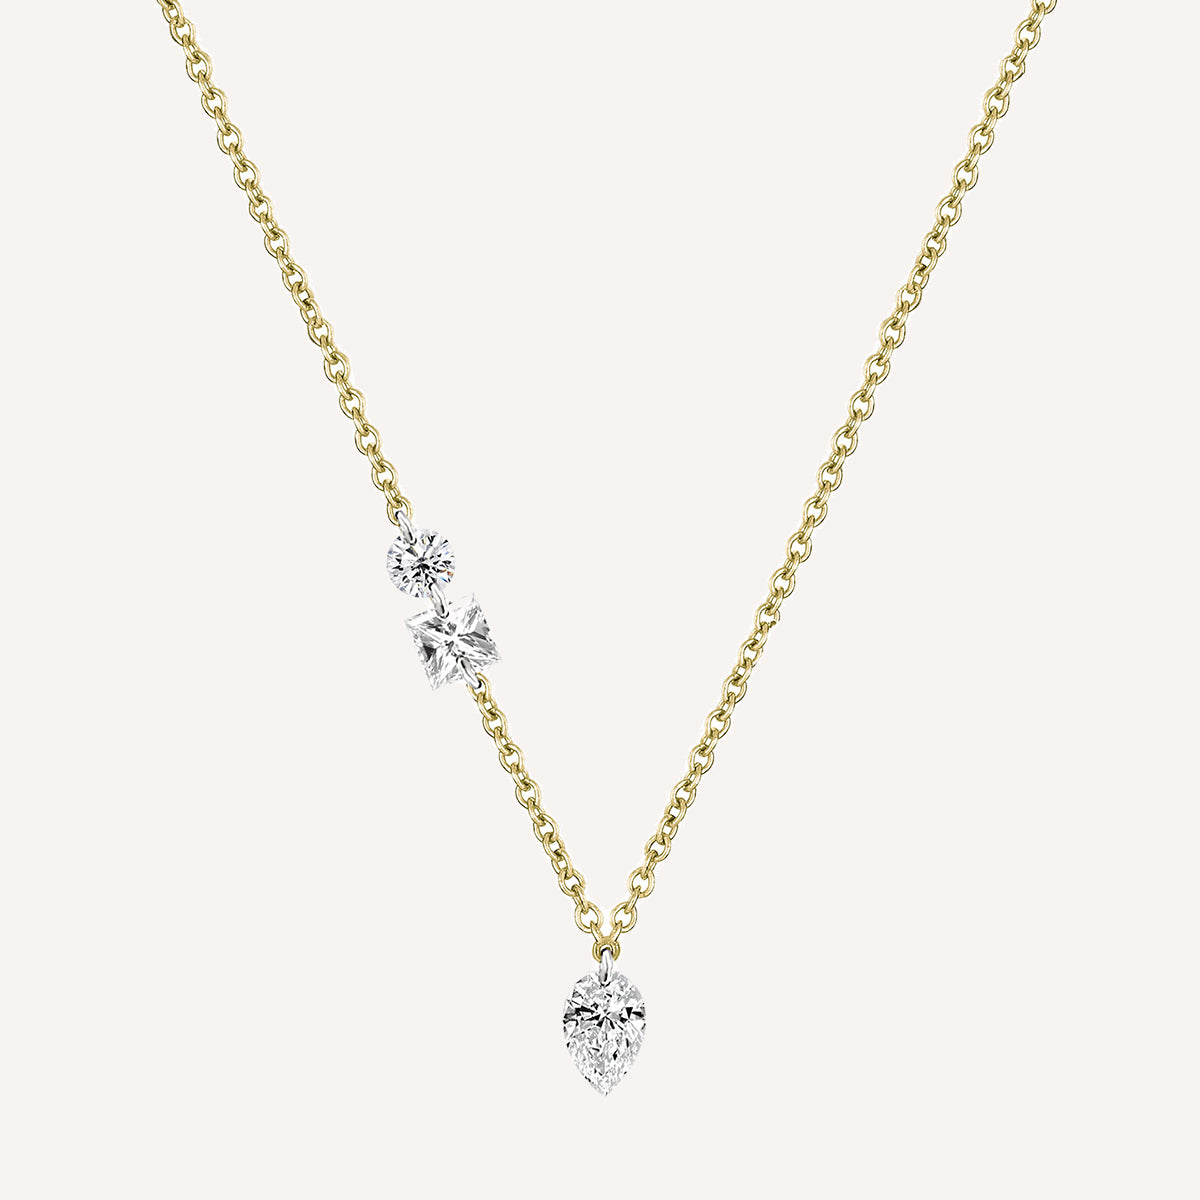 Roberto Coin Diamonds By The Inch 18k Yellow Gold 5 Station Diamond Necklace  - Jewelry | Manfredi